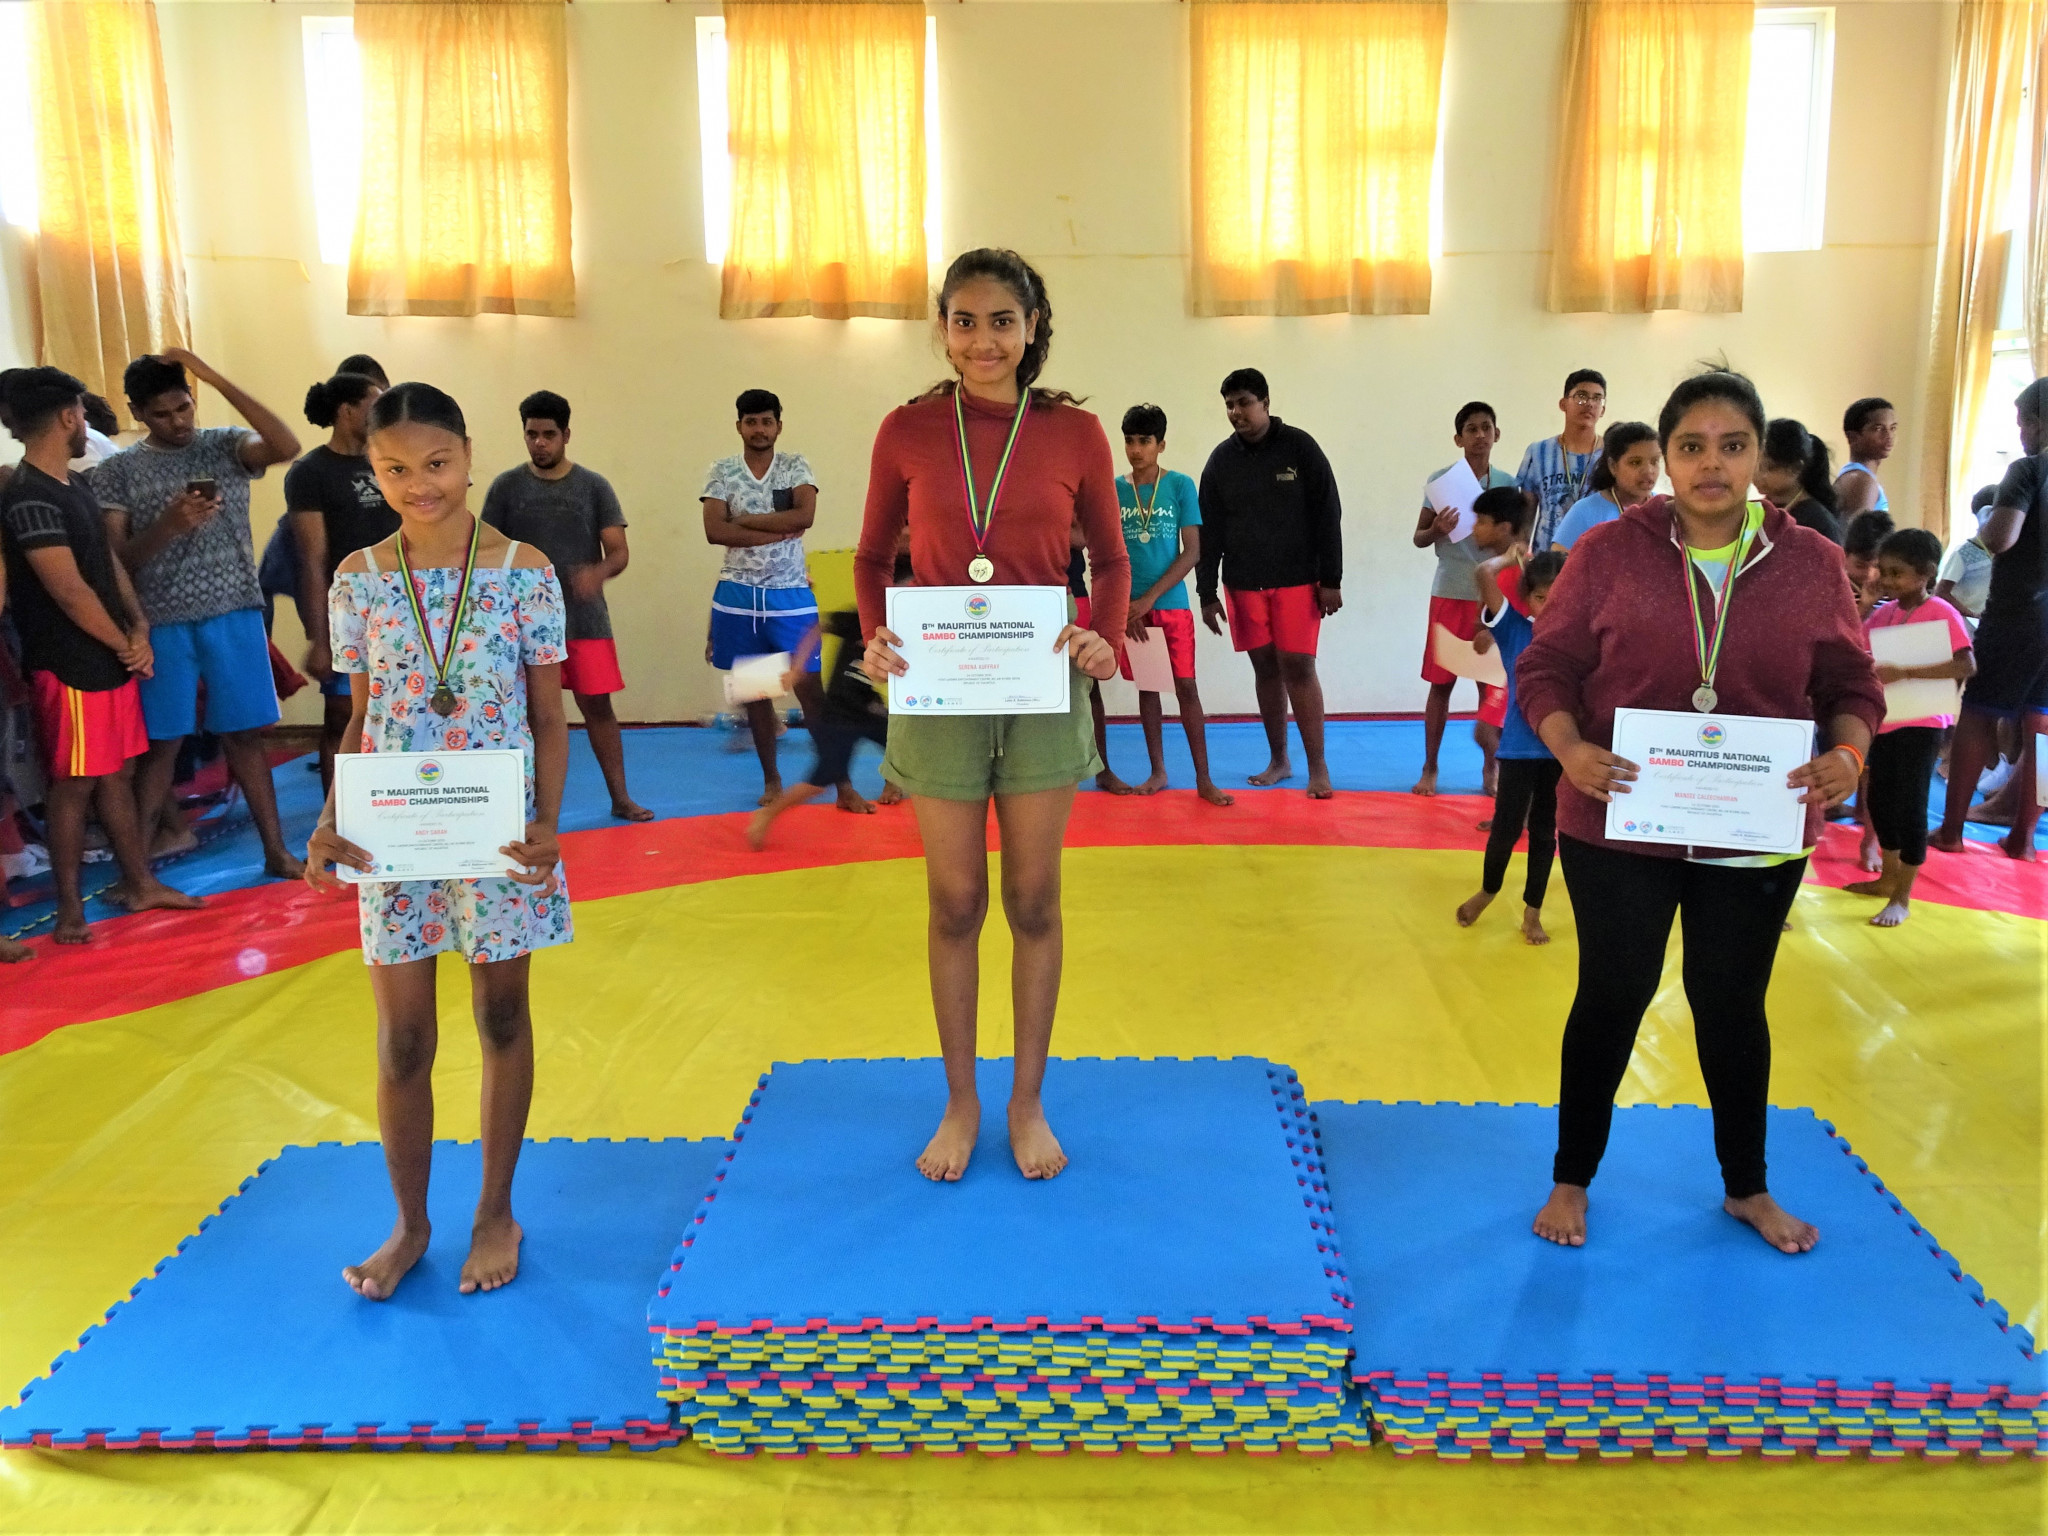 Mauritius Sambo Federation President Parsad Balkissoon said the increase in the number of girls participating in sambo was particularly pleasing ©Mauritius Sambo Federation